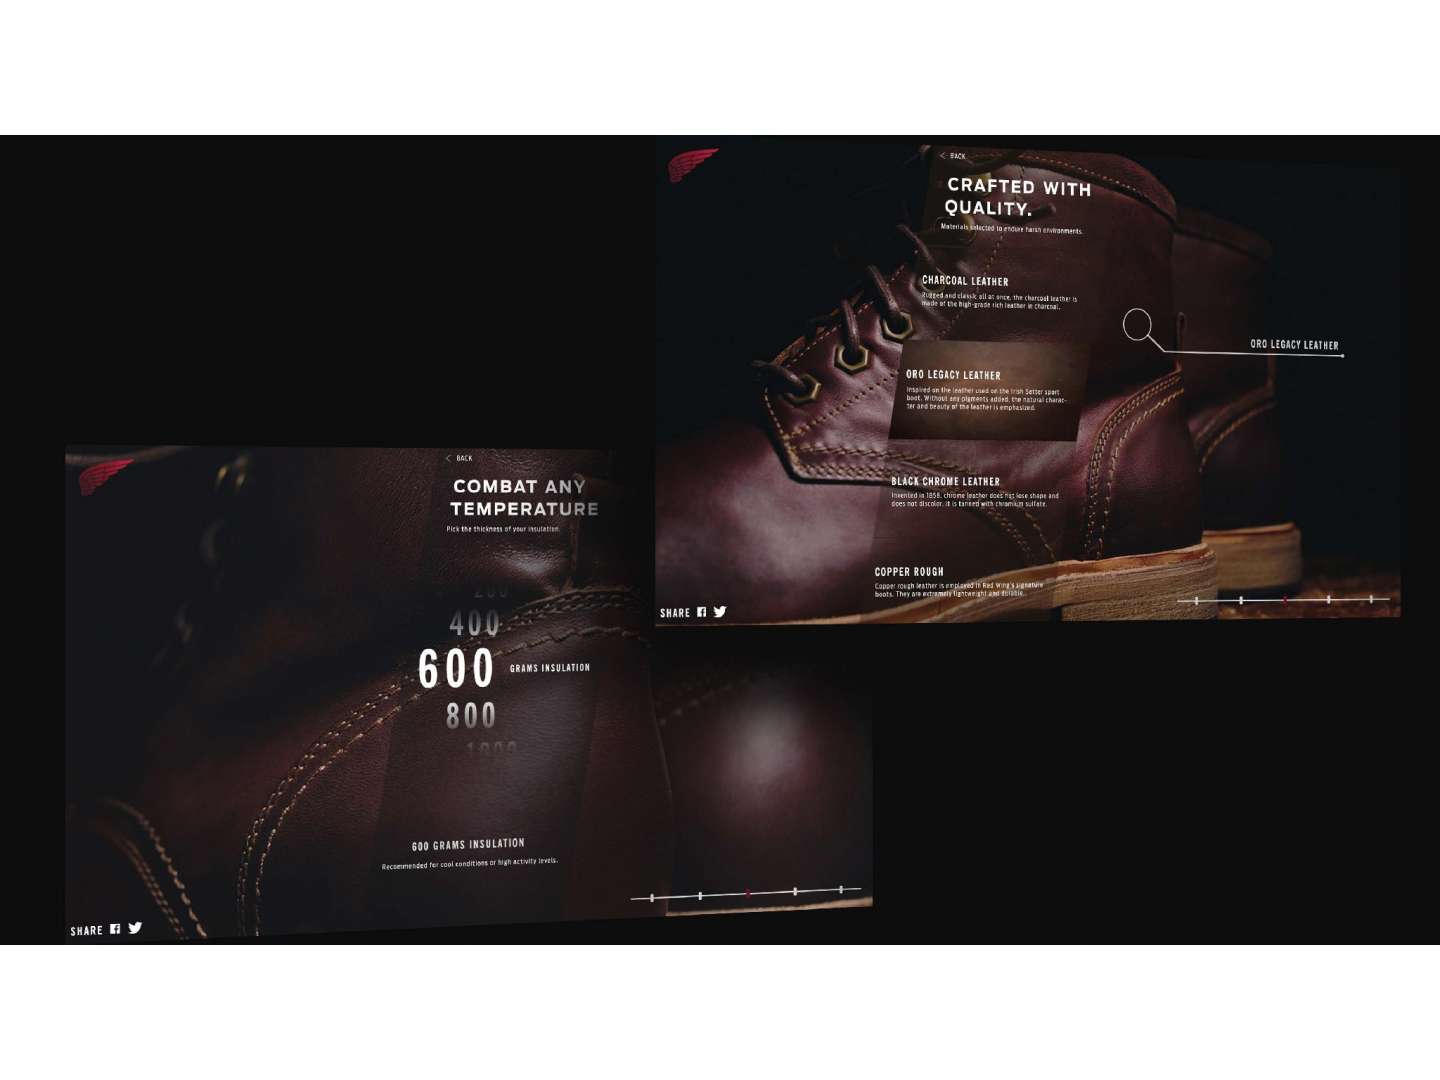 Red Wing E-commerce Redesign